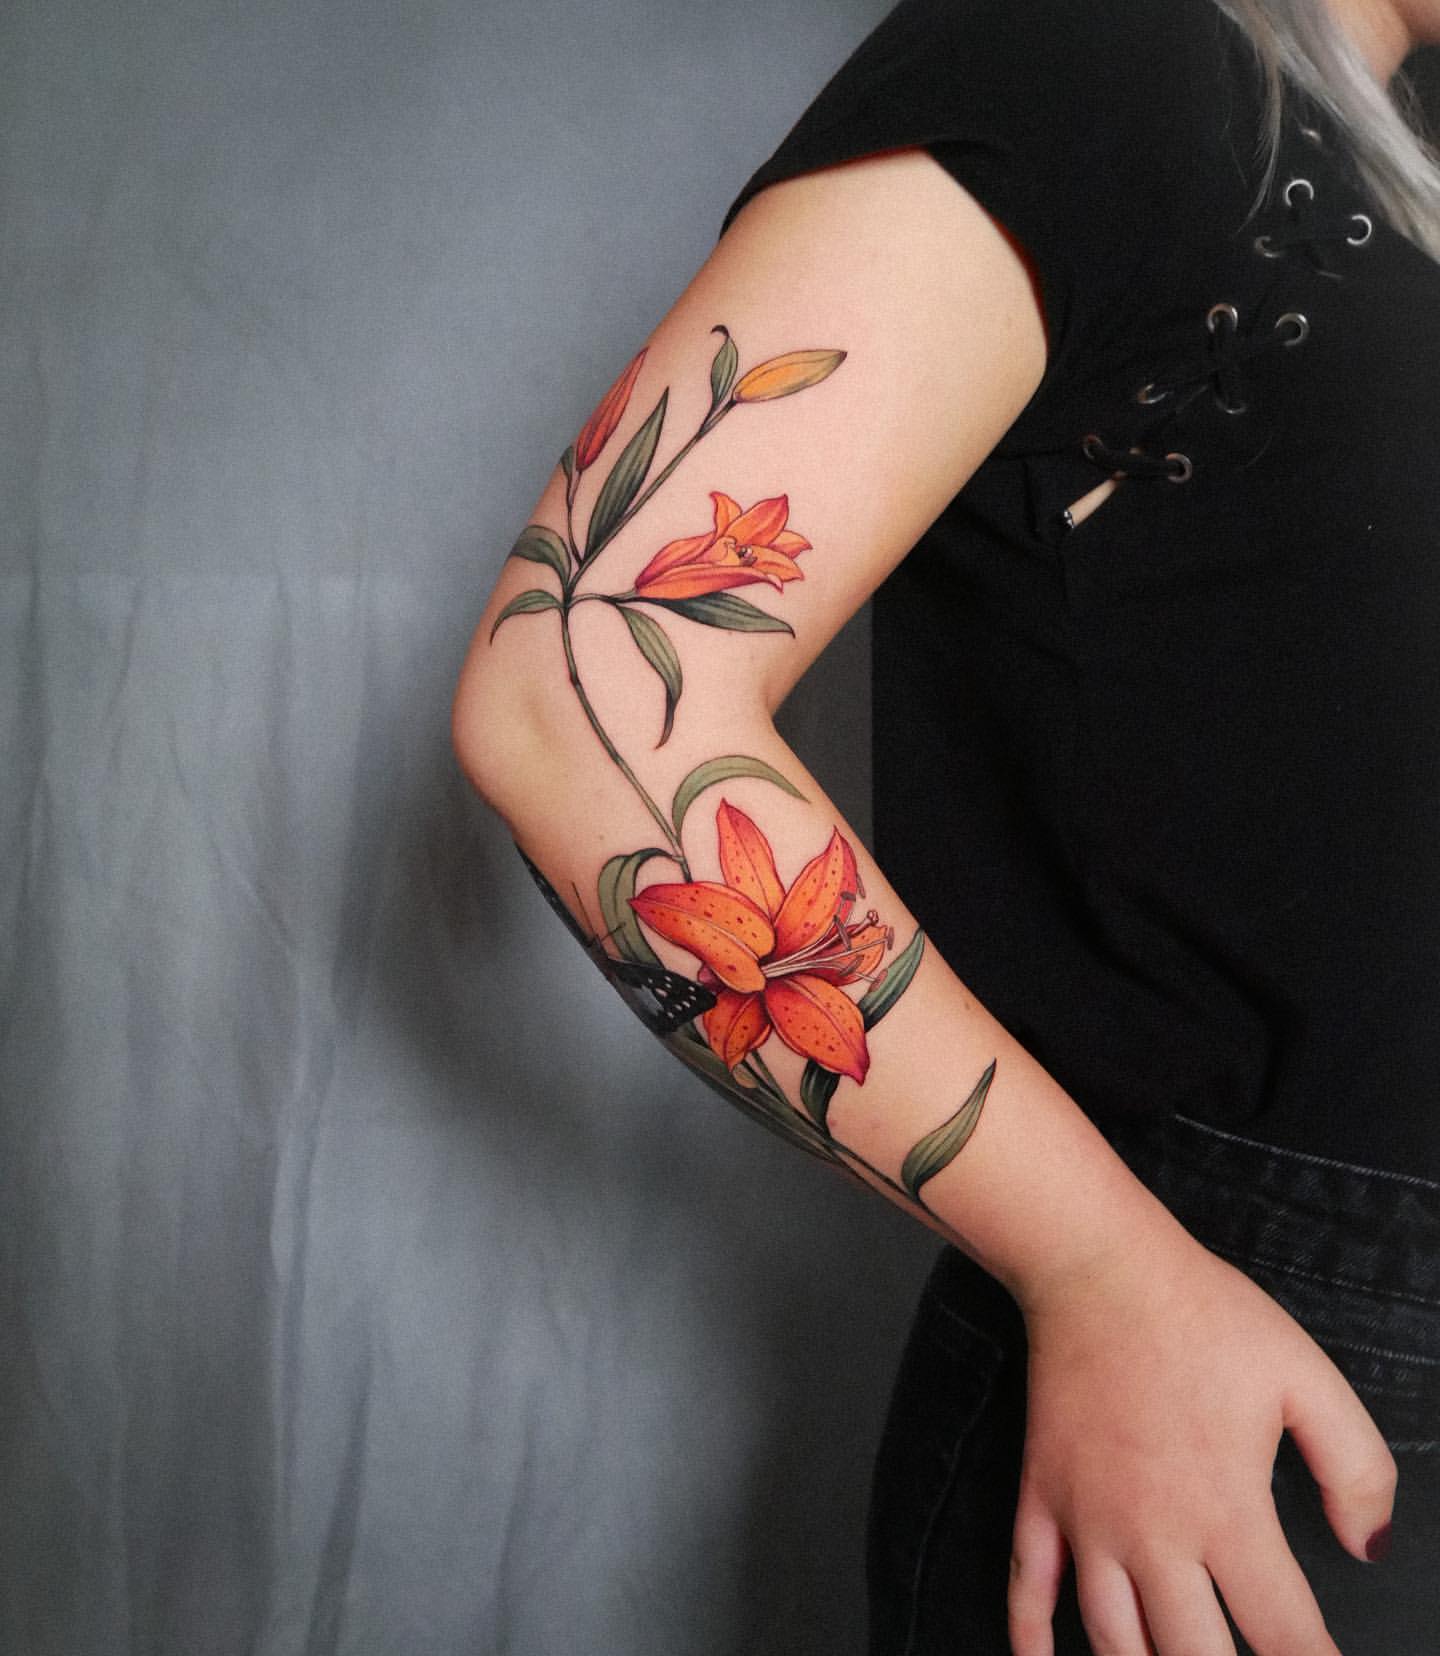 Arm Tattoos for Women 23